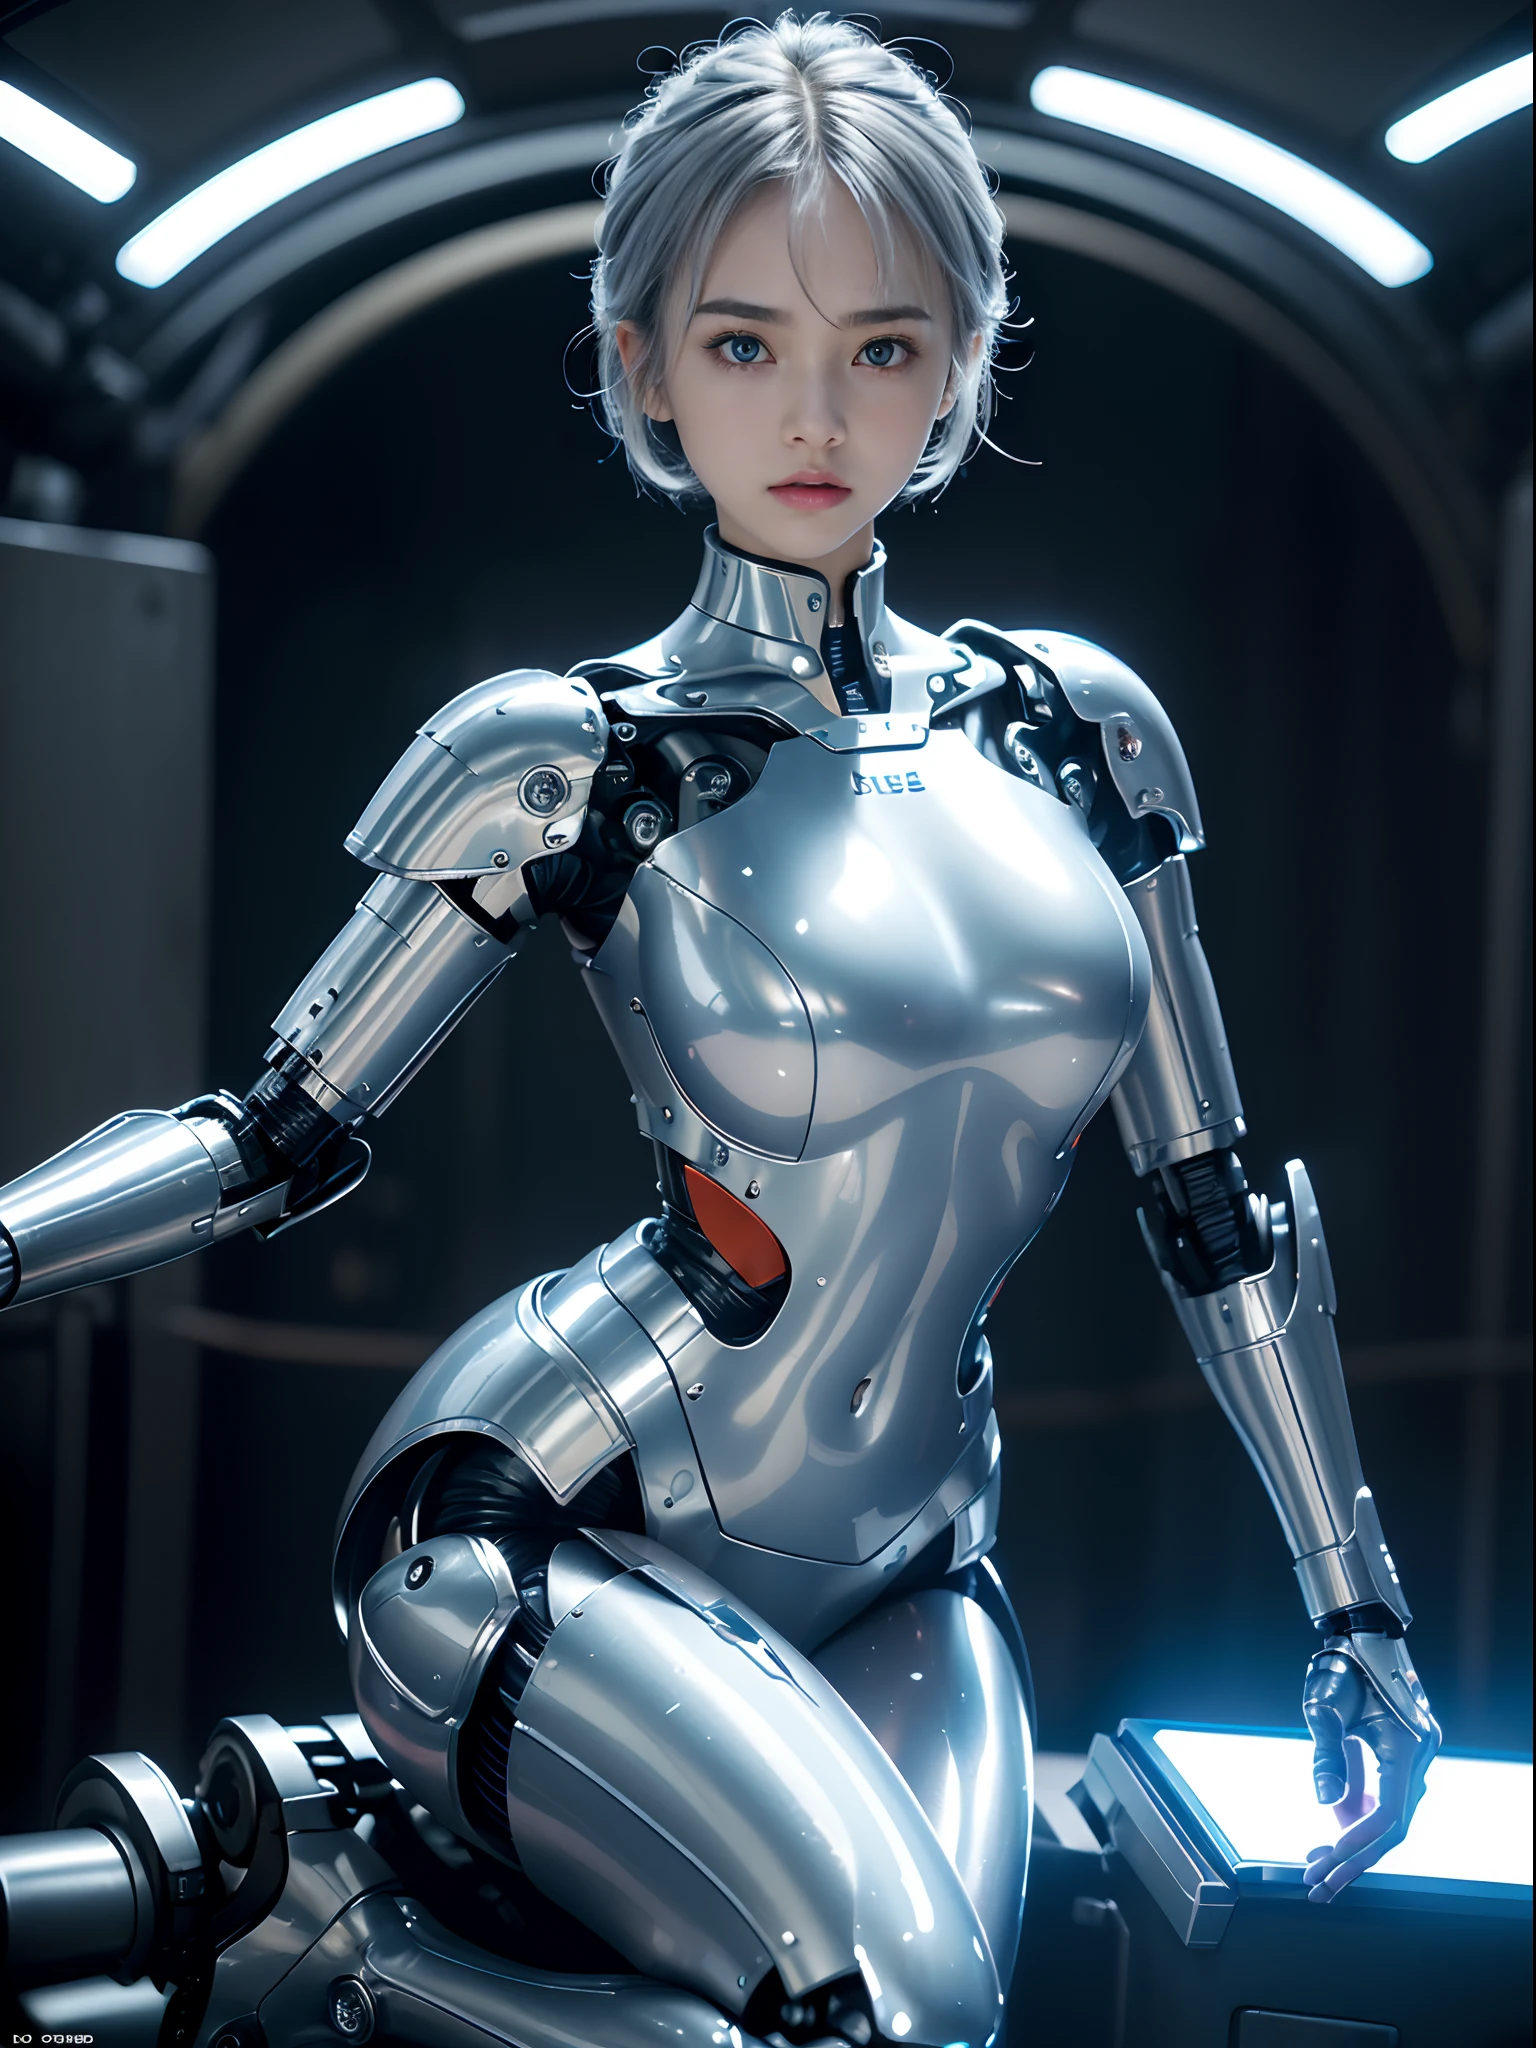 the best ever、8K,(((full body Esbian)))、(((The sheen)))、(((metalic)))、(((Very shiny、Very hard armor)))、(((cyberpunked)))、The cute beauty of the mecha(Best Quality, Detailed details, masutepiece, , 8K, Chiaroscuro，Colossal 、Bust photos are ultra-realistic and realistic, Highly detailed Nikon videography )、((Beautiful and shining natural eyes))、Beautiful navel、Human skin type、（(Highly photorealistic human beings))、(Perfectly round pupils)、The details of the iris of the pupil are very amazing、(((Shining eyes)))、accurate fingers、Limbs without breakdowns、(((Caucasian 14 year old girl)))、((Very fair skin,,,,,,,,,,,,,,))、(((The specifics of the skin of a white girl)))、Naturally closed mouth、Natural areola、natural 、Staring eyes、Natural body、a baby face、Feminine face、Feminine body、(with round face)、a small face、soft cheeks、Looking at the camera、full body Esbian、、Beautiful and shining natural eyes、Human skin type、（(Highly photorealistic human beings))、(Perfectly round pupils)、The details of the iris of the pupil are very amazing、Limbs without breakdowns、Naturally closed mouth、Natural areola、natural 、Staring eyes、Natural body、Slightly baby-faced、Feminine face、Feminine body、with round face、a small face、soft cheeks、Looking at the camera、full body Esbian、Balanced face、drooing eyes、(((Not a crushing eye)))、Body with human-like proportions、(((Slightly longer arms)))、(rather long torso)、(((slightly larger hands)))、human face、(((Glowing blue light blue silver hair)))、(((Cool and cute short-cut hair)))、(((The background is the future)))、(((8 Head Body)))、(((Luminescent light purple eyes)))、(((Thin thin silver eyebrows)))、(((Thin eyebrows)))、Looking here、(Gentle double eyelids)、(((Gentle face)))、(((Background Mecha)))、bladerunner、(((RoboCop)))、Ghost in the Shell、tron、Space Detective Gavan、Swat、police officers、(((Night background)))、(((No makeup)))、(((Hollywood Science Fiction Movie Lighting))、(((New York in 5000 AD)))、((teal and orange))、Height 1cm、Leg length 80cm、the length of t